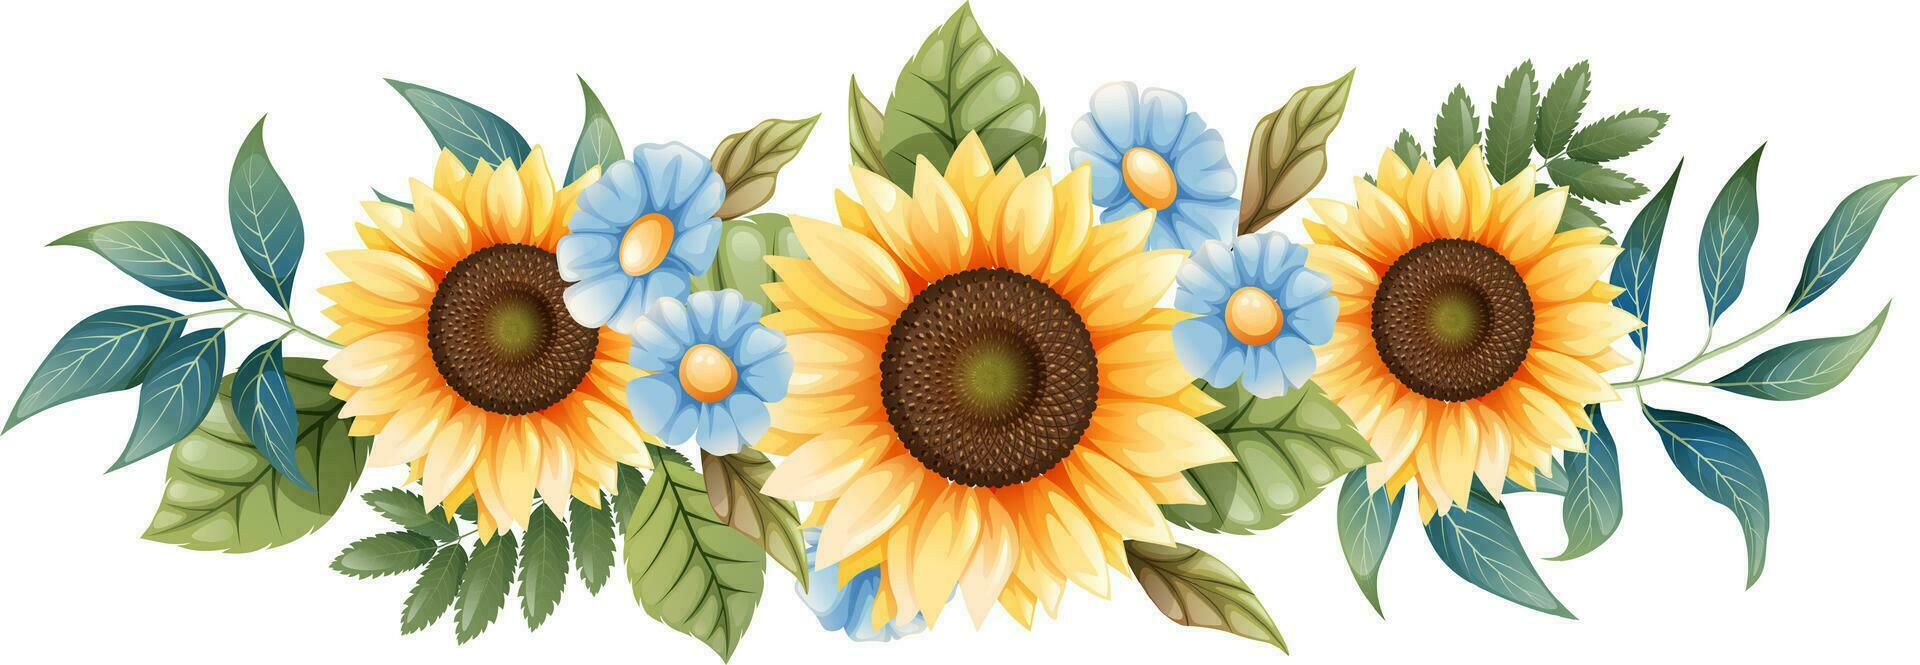 Floral arrangement of sunflowers and blue forget-me-nots on an isolated background. Bouquet of wild and agricultural flowers. vector